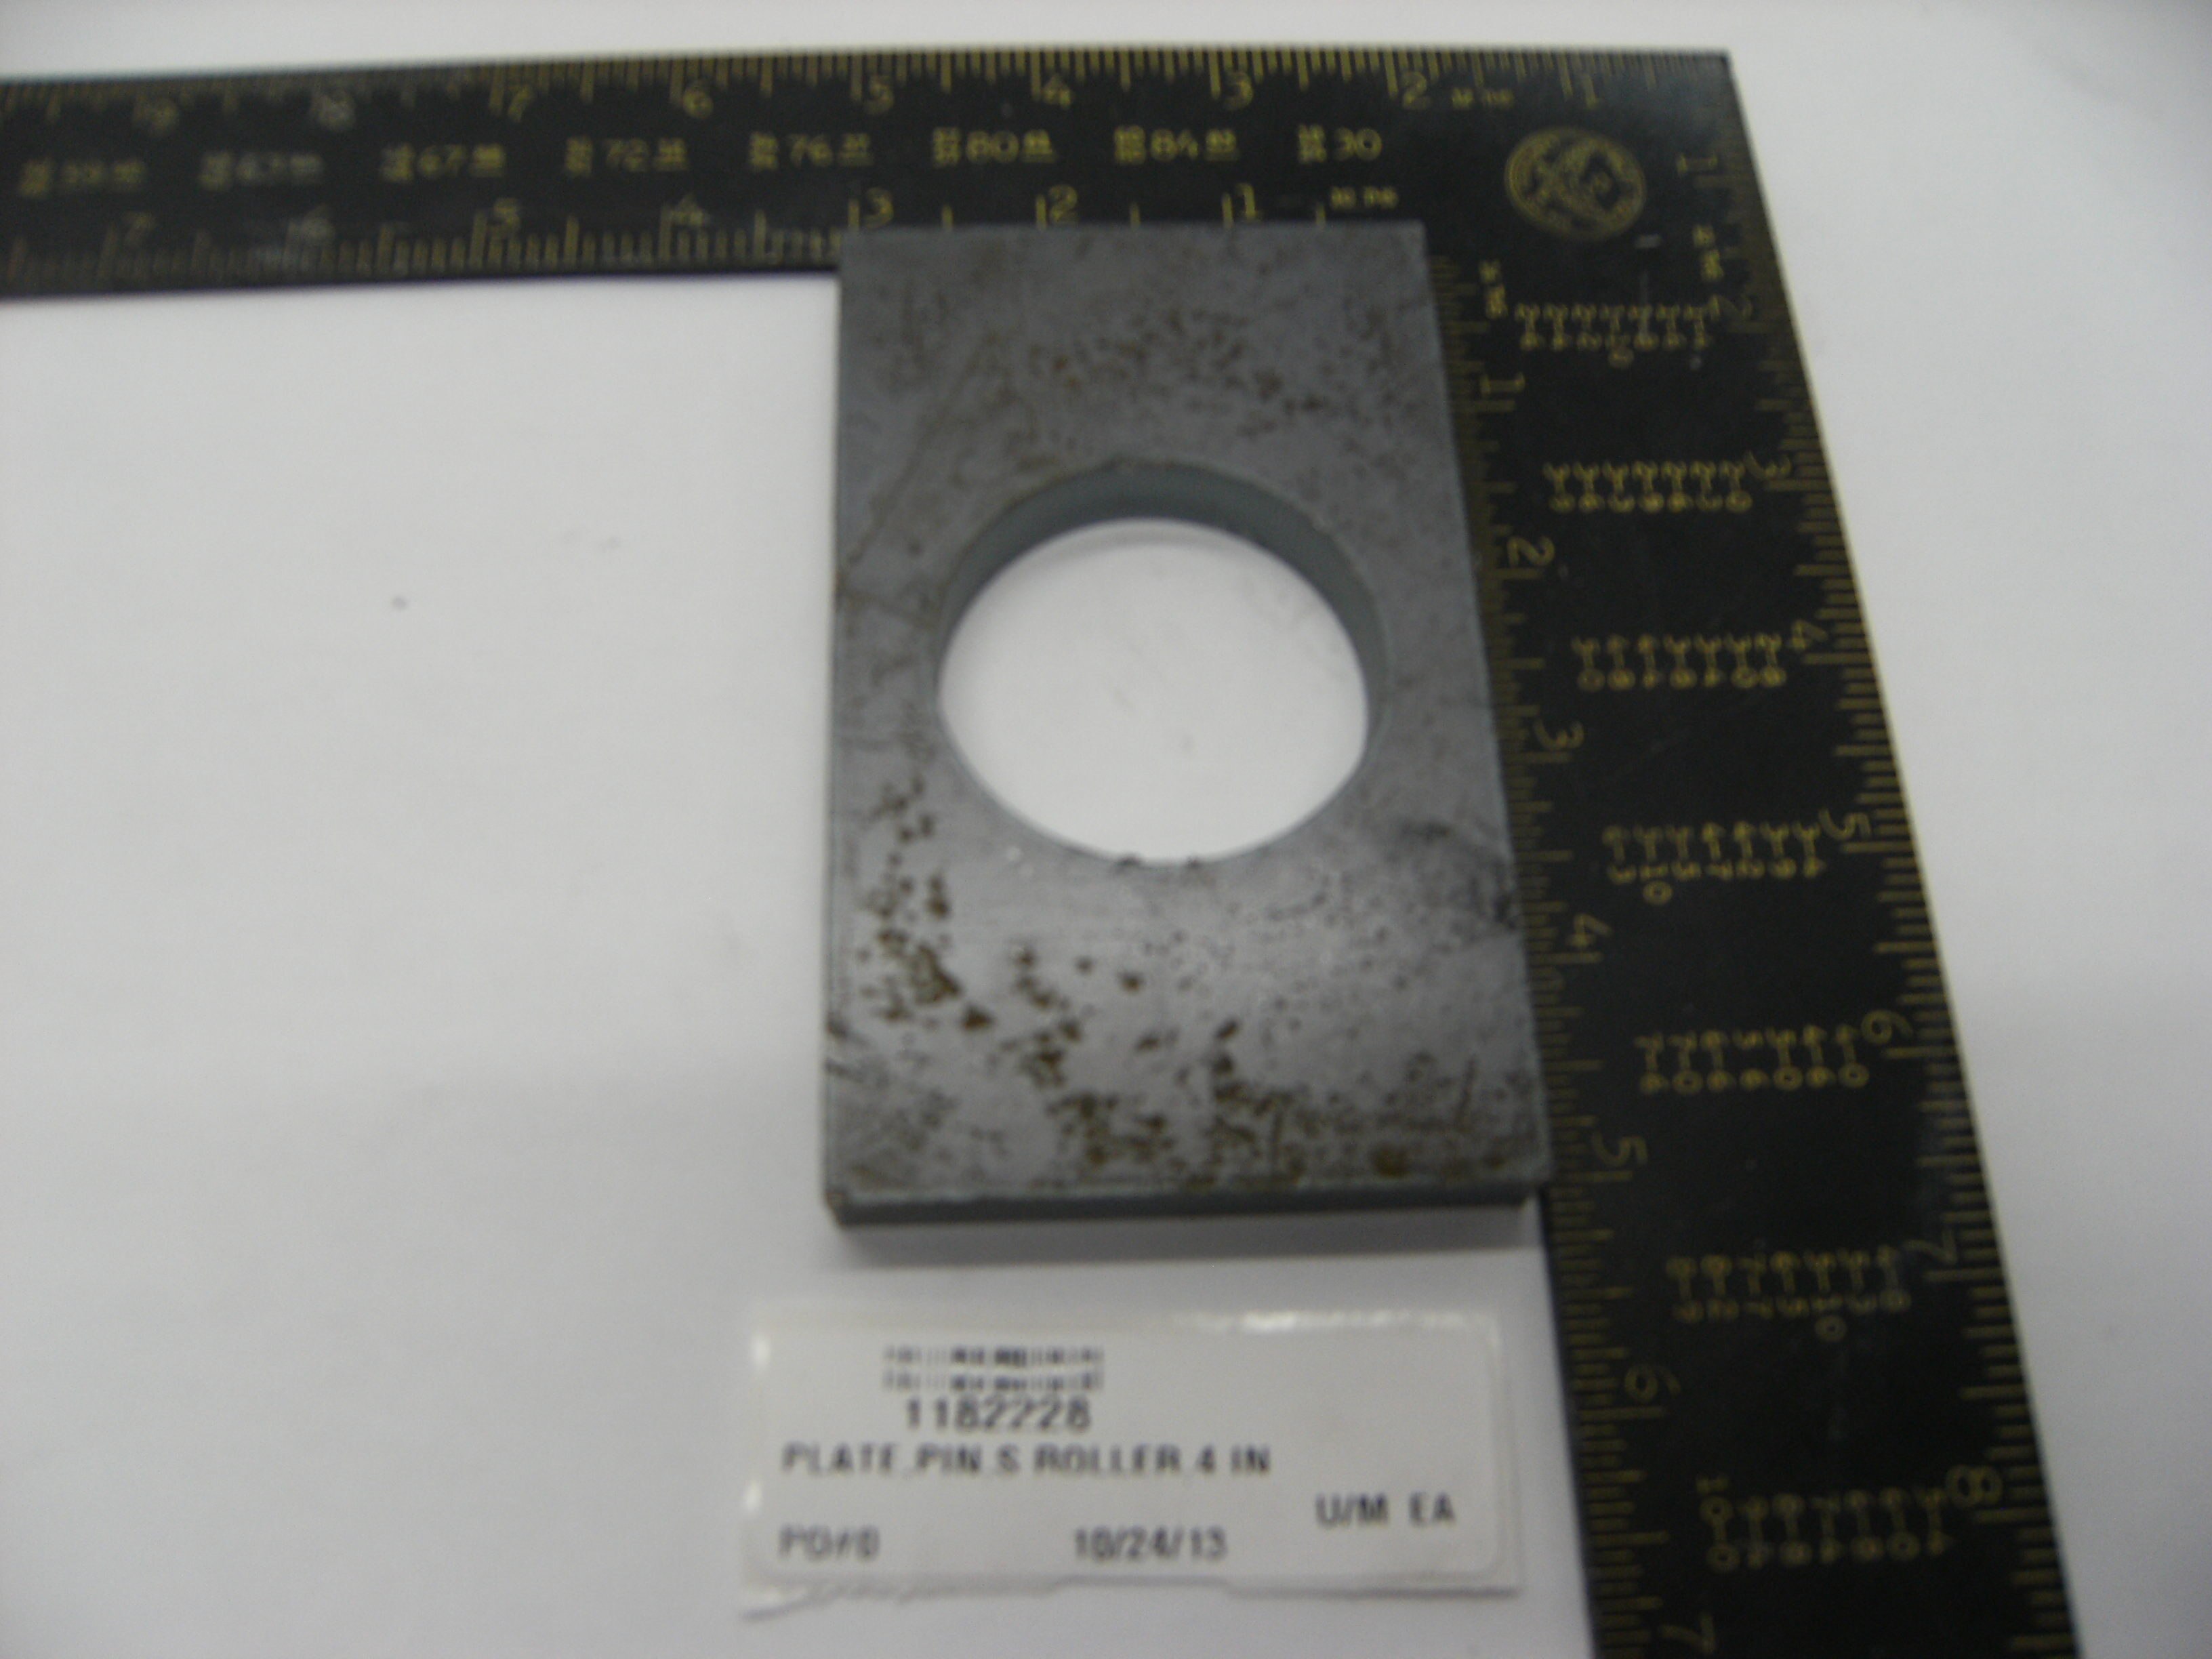 PLATE,PIN,S ROLLER,4 IN